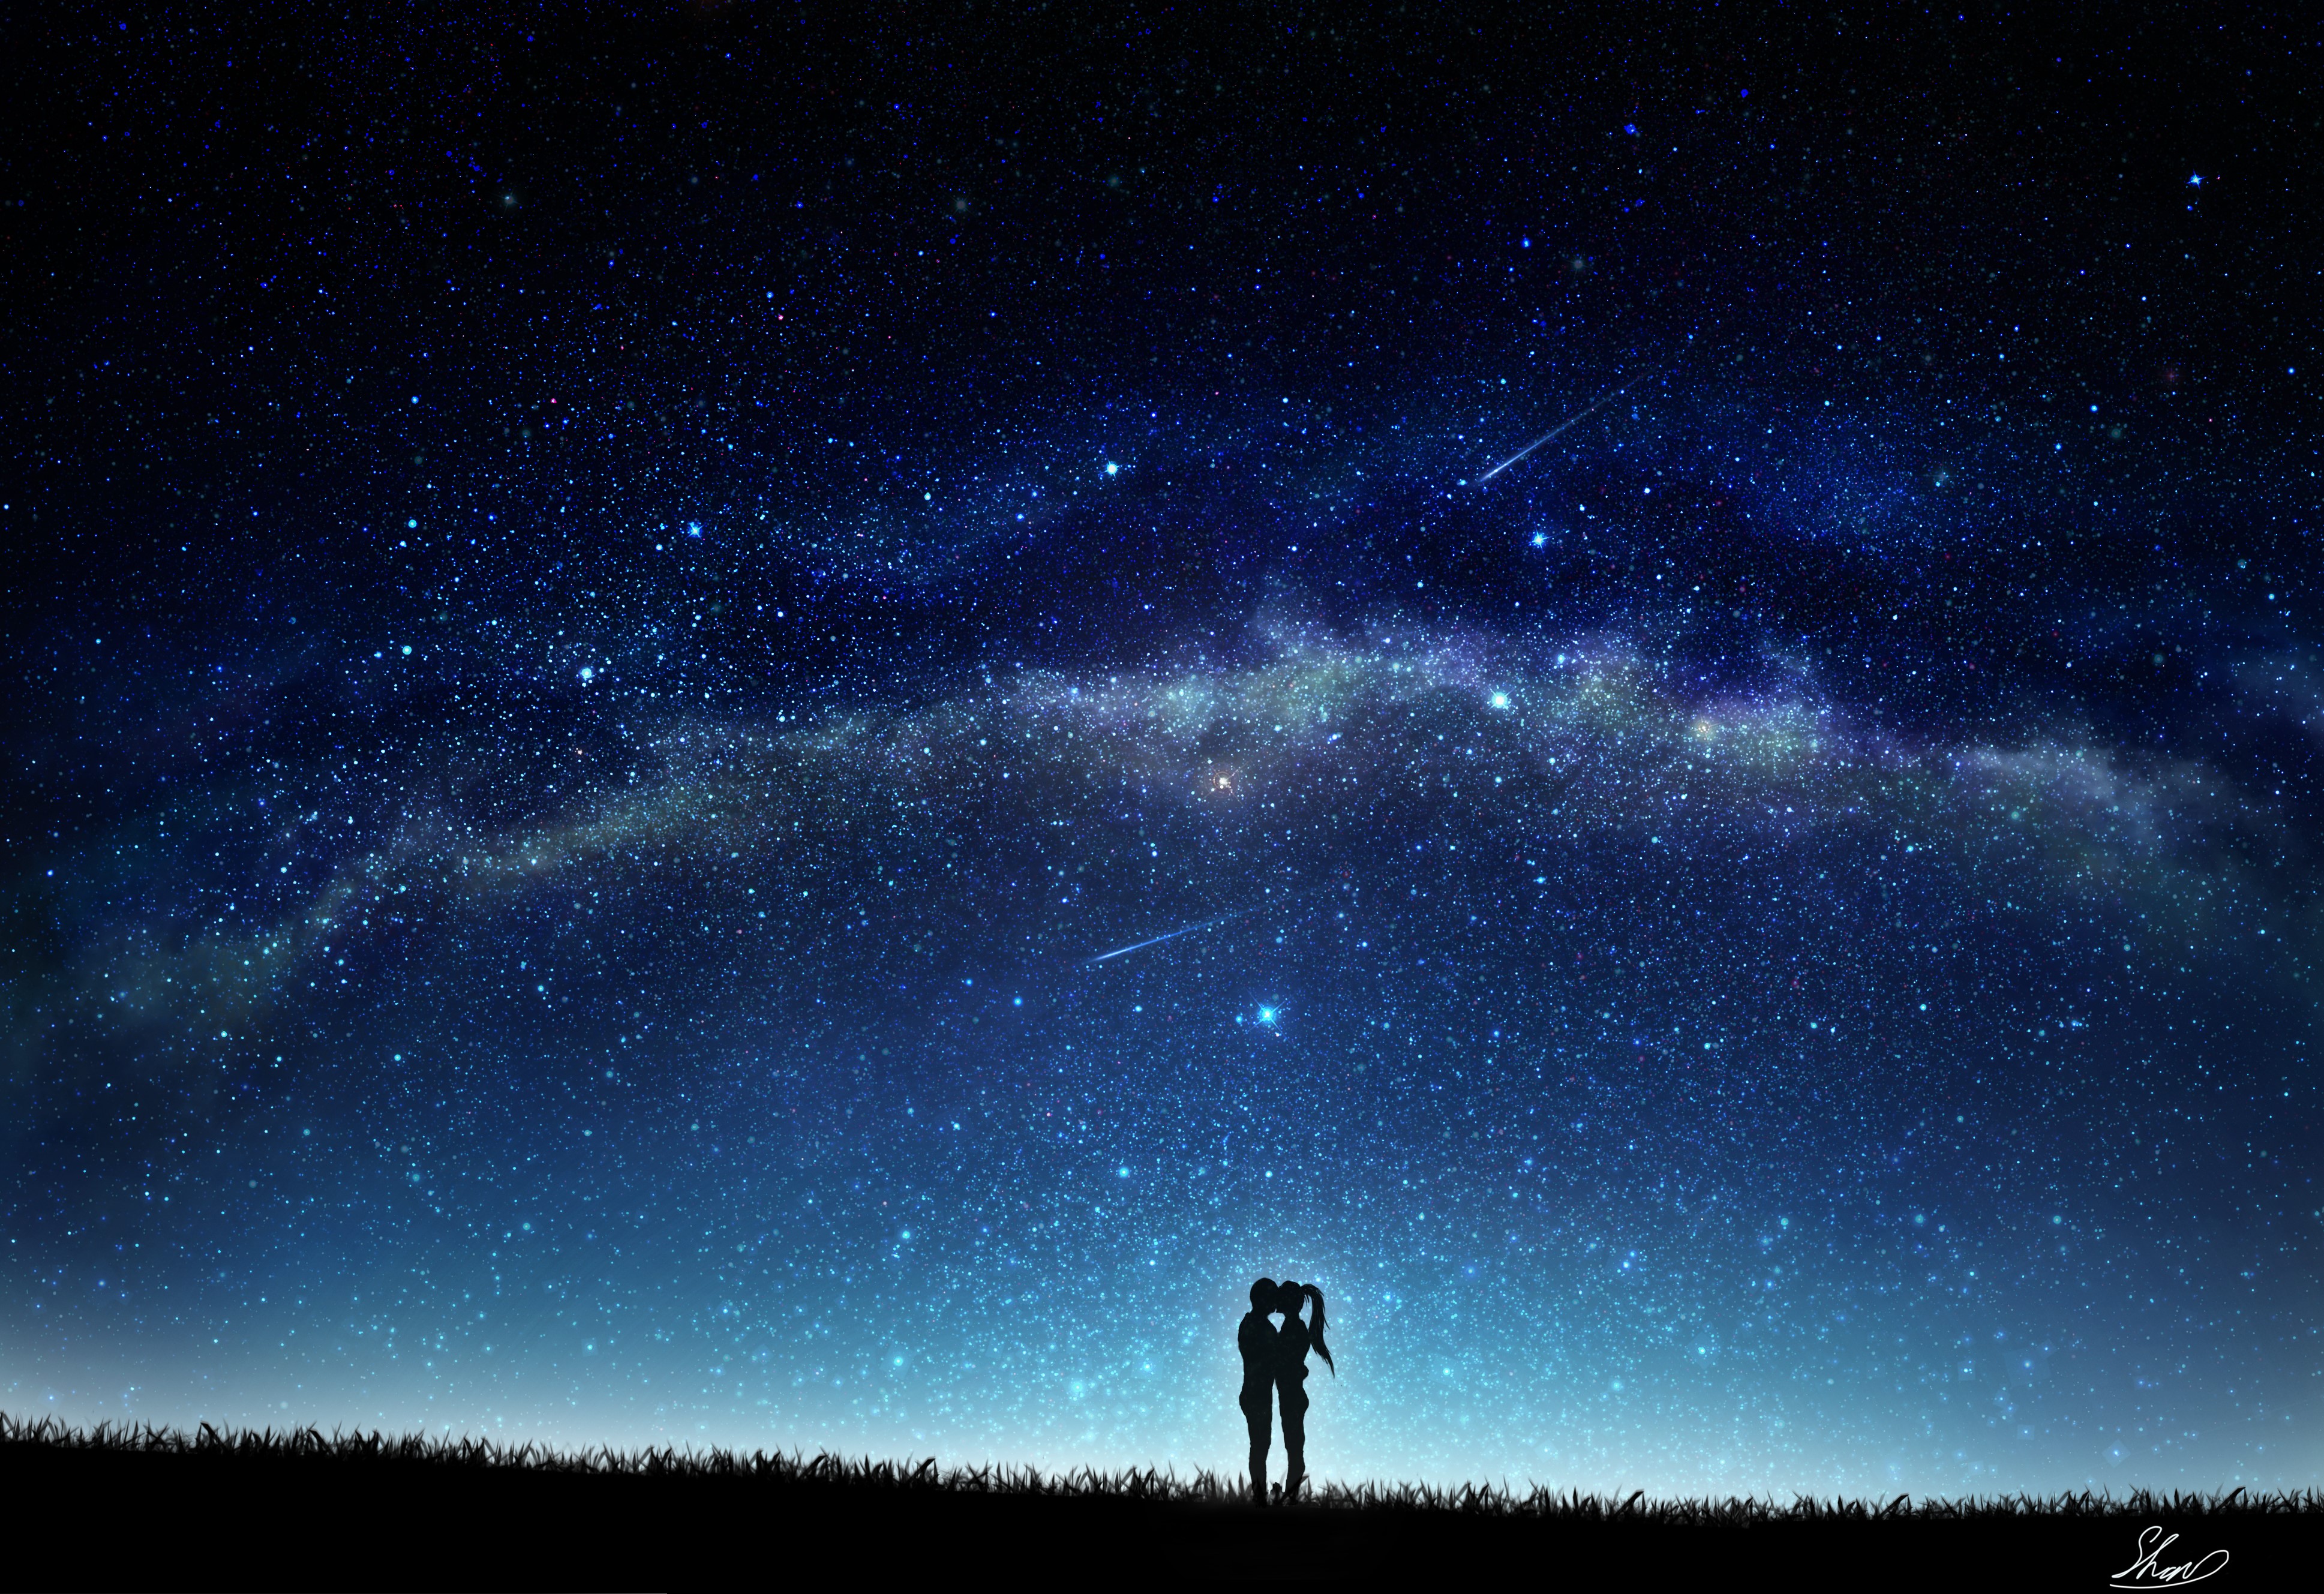 HD Wallpaper for theme: night sky HD wallpaper, background